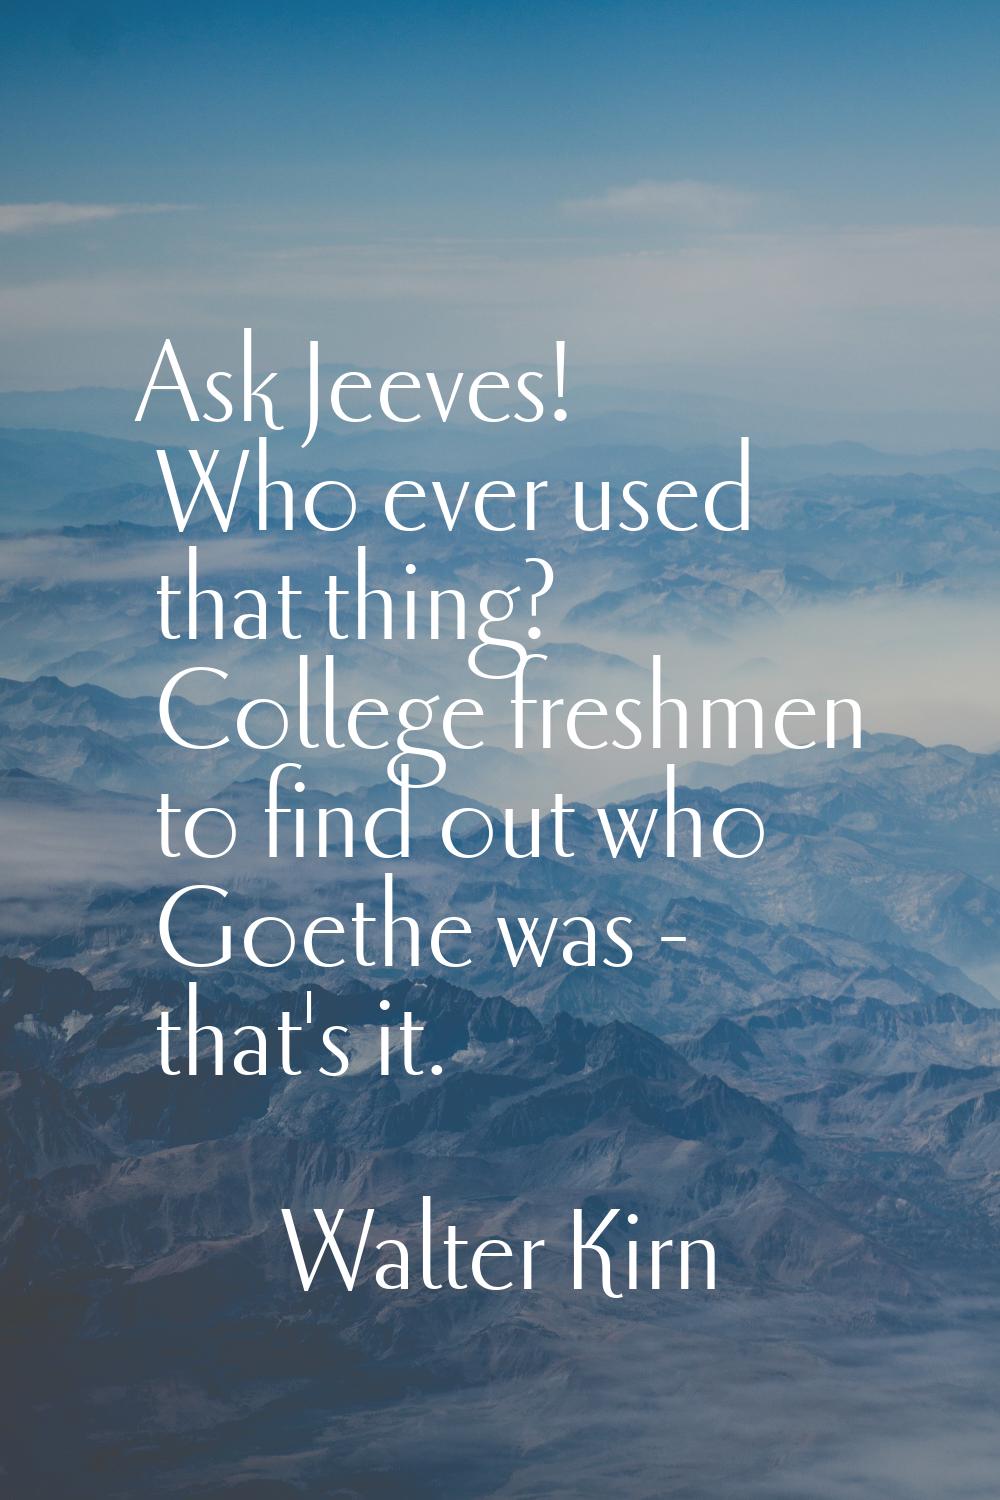 Ask Jeeves! Who ever used that thing? College freshmen to find out who Goethe was - that's it.